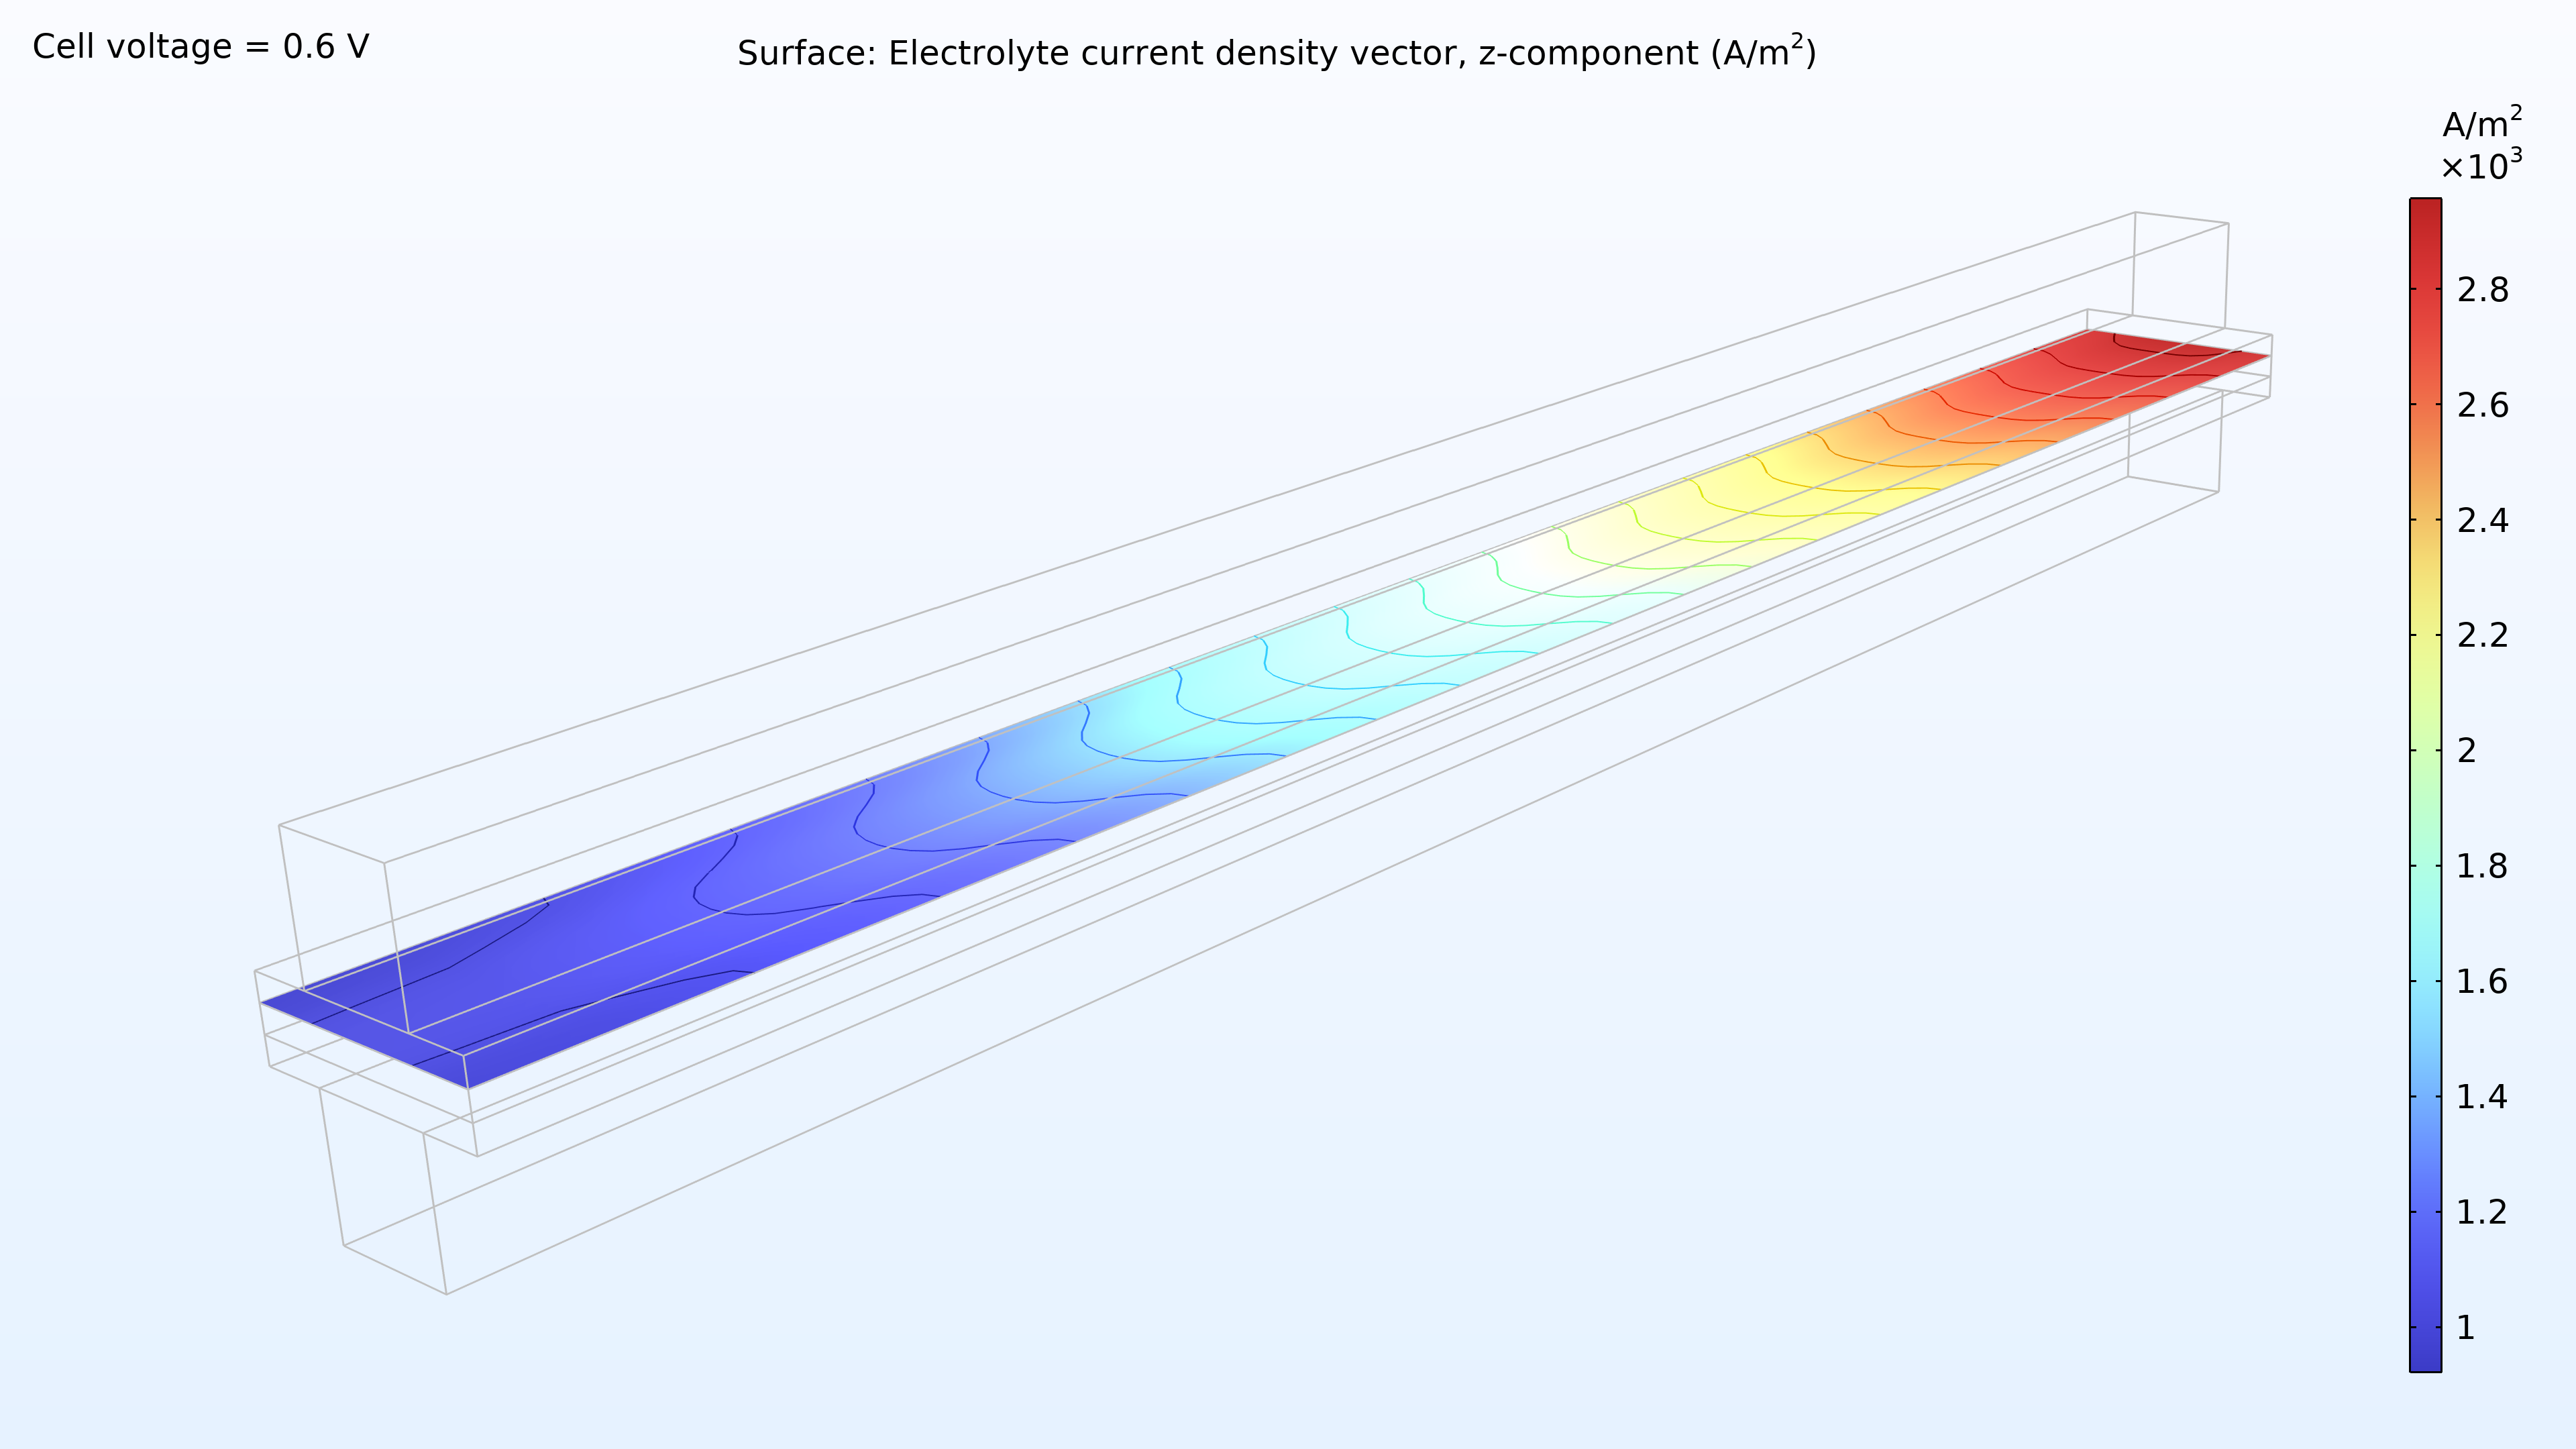 A plot showing the current density distribution in the electrolyte with a rainbow color scale, where the leftmost side is blue, the middle is light blue, and the rightmost side is red.